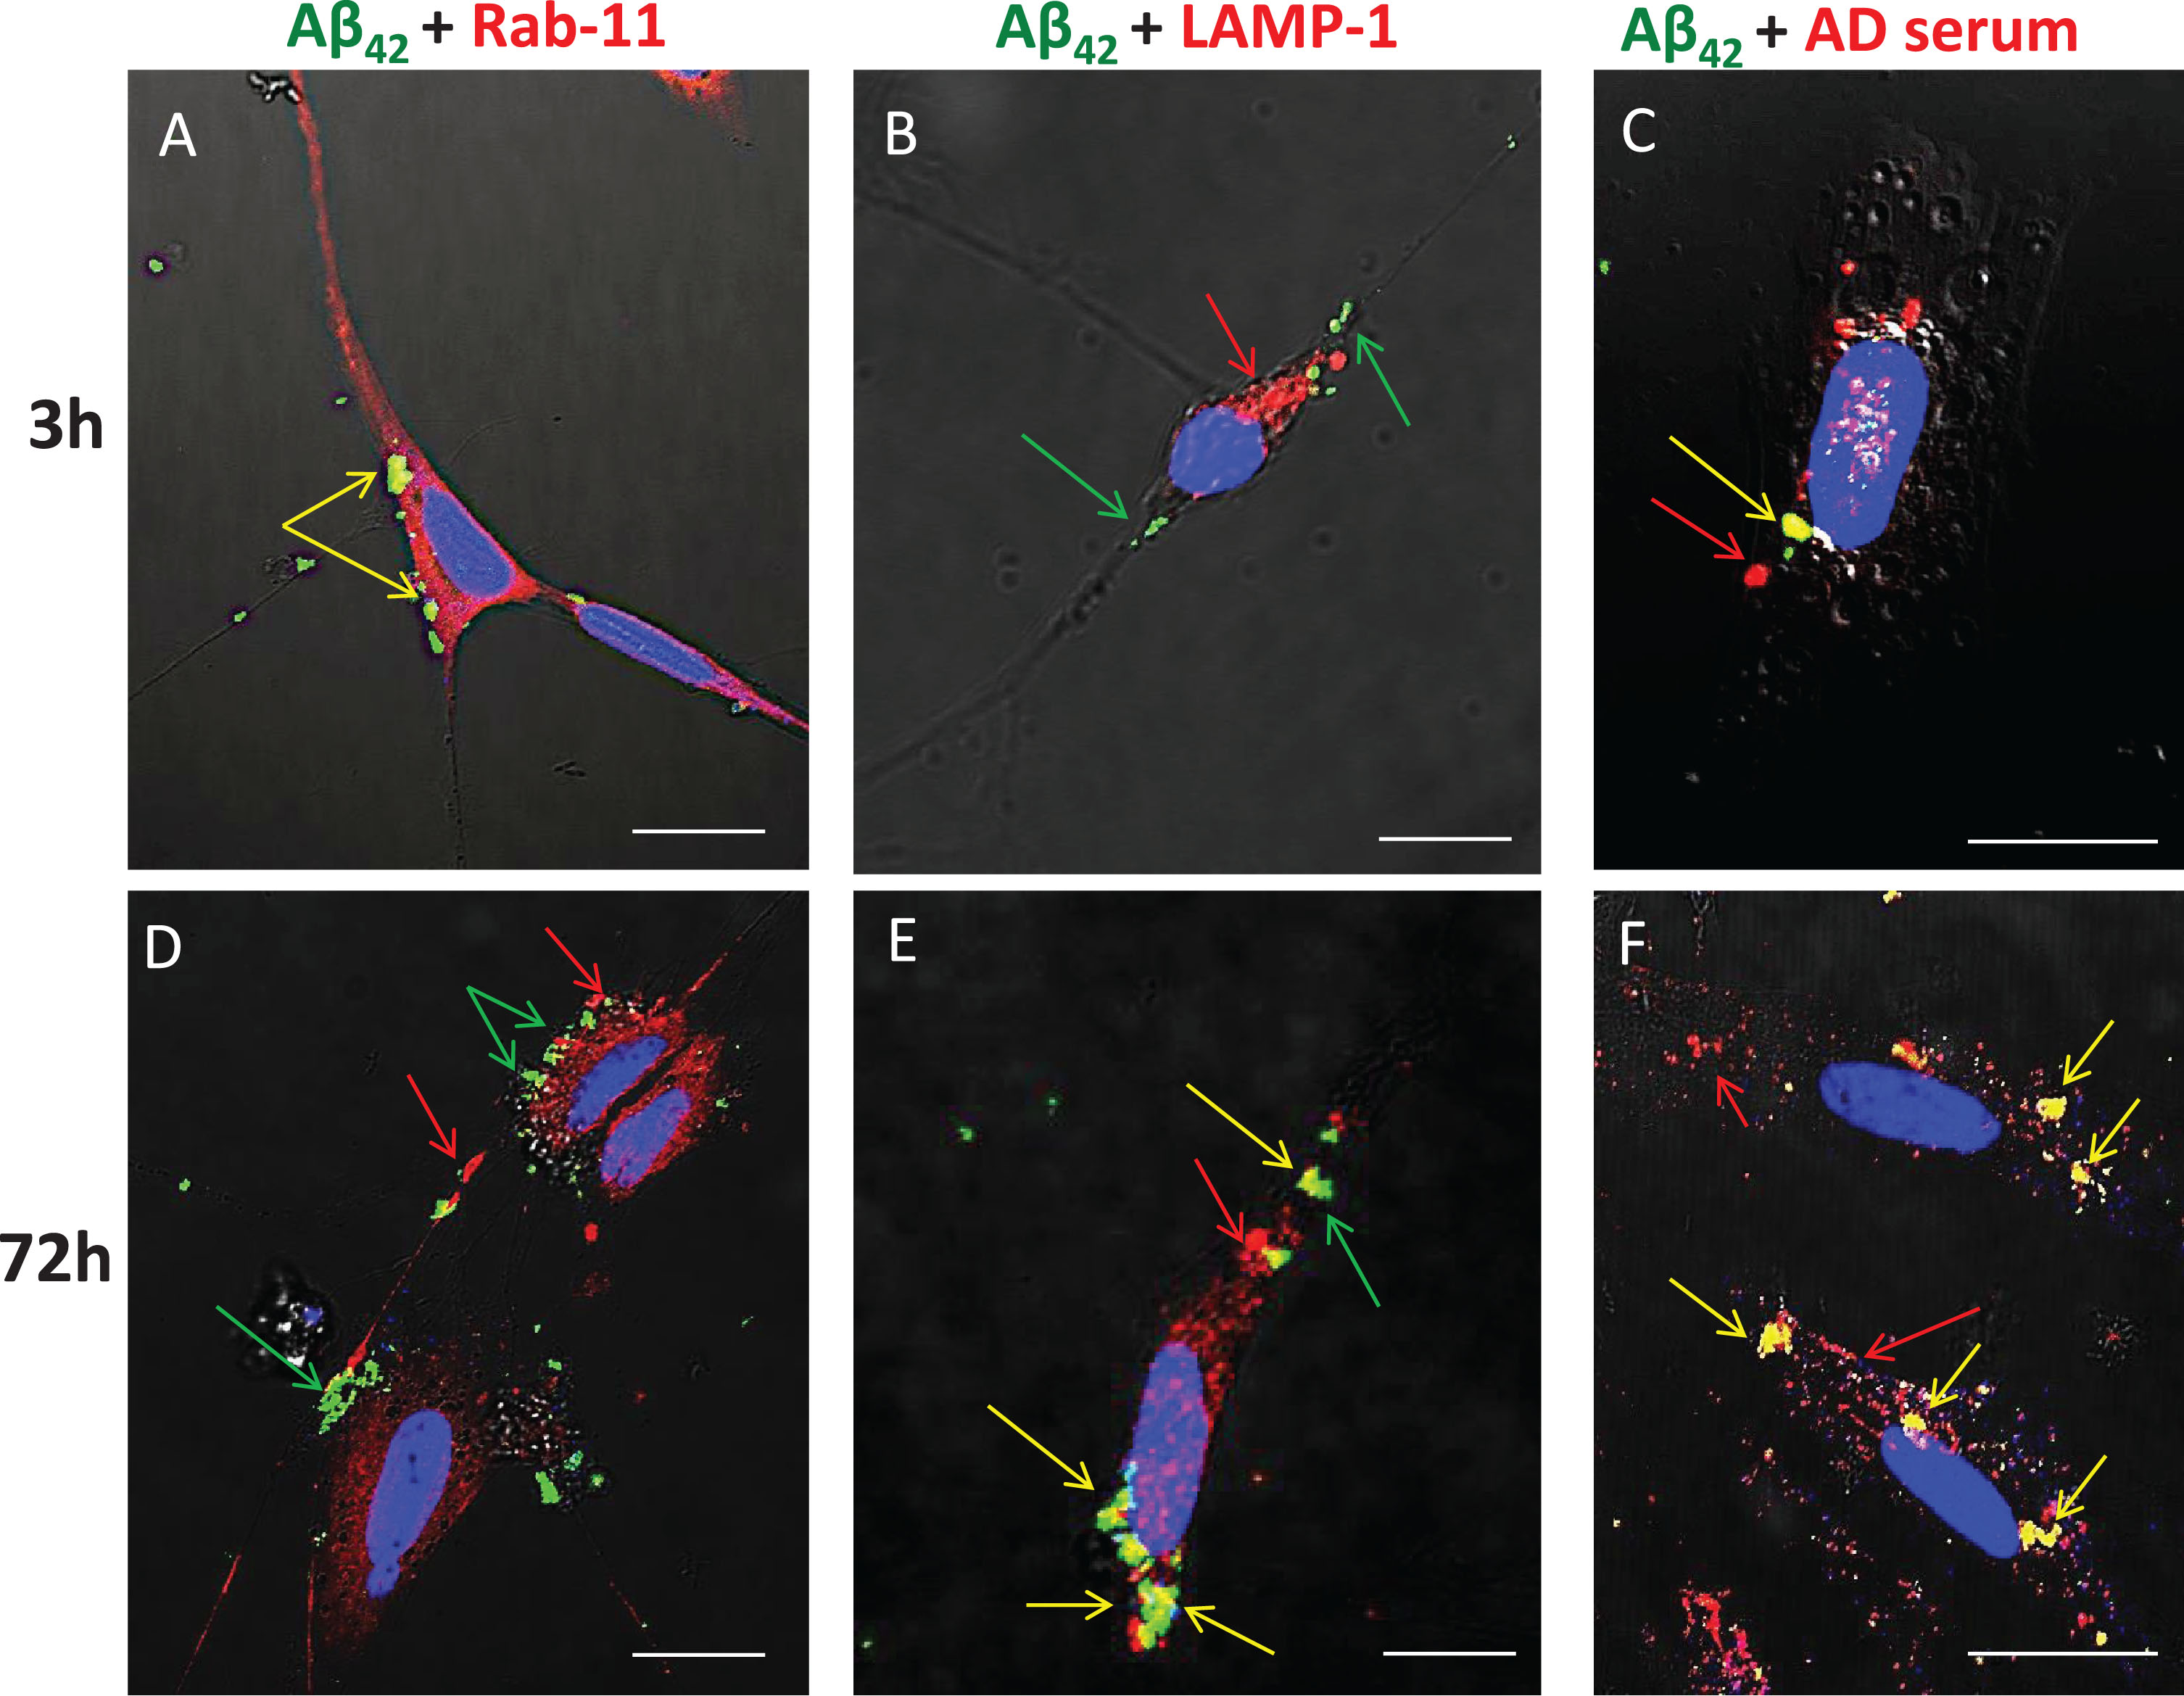 Aβ42 is trafficked through endosomes (Rab11) to the lysosome compartment (LAMP-1) following internalization. SH-SY5Y treated from 3 to 72 h with FITC-Aβ42 with or without AD serum. ICC was used to detect Rab-11 (early endosomes) and LAMP-1 (late endosomes/early lysosome marker). Co-localization was detected by superposition of red and green signals to yield yellow fluorescence. At 3 h, nearly all internalized FITC Aβ42 was associated with early endosomes (Rab-11). In cells treated for 3 h and 72 h with FITC Aβ42 in the presence of serum from an AD patient, co-localization of Aβ42 and IgG was evident, although some internalization of Aβ42 also occurred independently of IgG. At 72 h, little or no co-localization of Aβ42 with Rab11 was detected, but significant accumulations of co-localized Aβ42 and LAMP-1 (lysosomes) were common. Rab-11, early endosome; LAMP-1, lysosomal marker; AD, Alzheimer’s disease human serum; green arrow, Aβ42; red arrow, secondary protein of interest; yellow arrow, co-localization; **p < 0.01; ***p < 0.001; Scale bar = 10 μm.